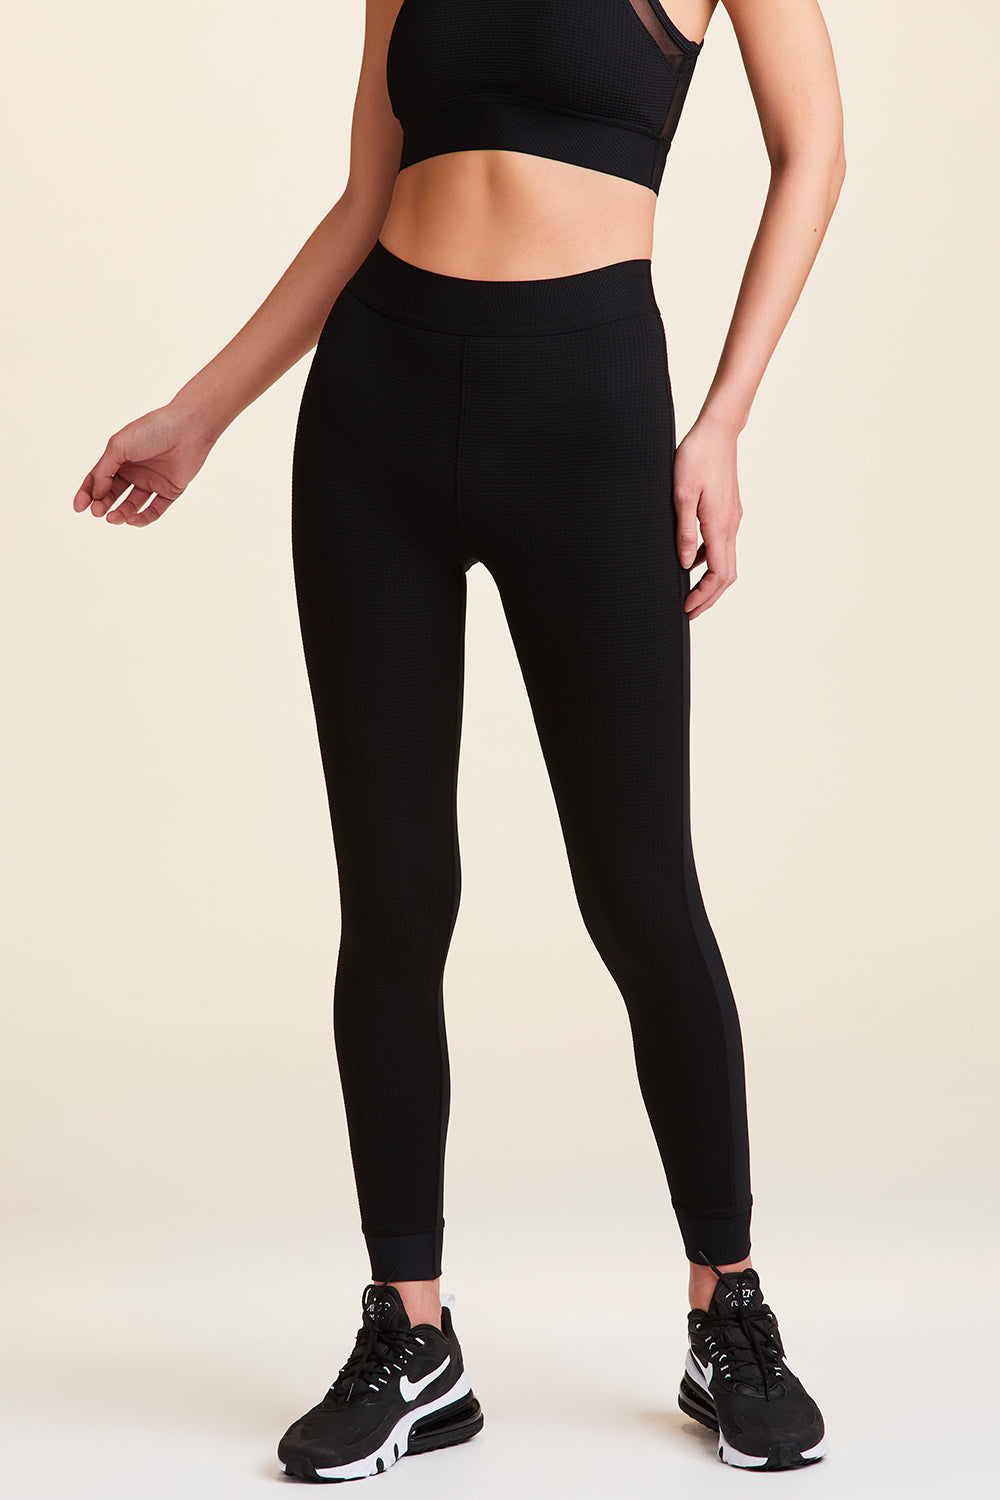 Front view of Alala Women's Luxury Athleisure thermal tight